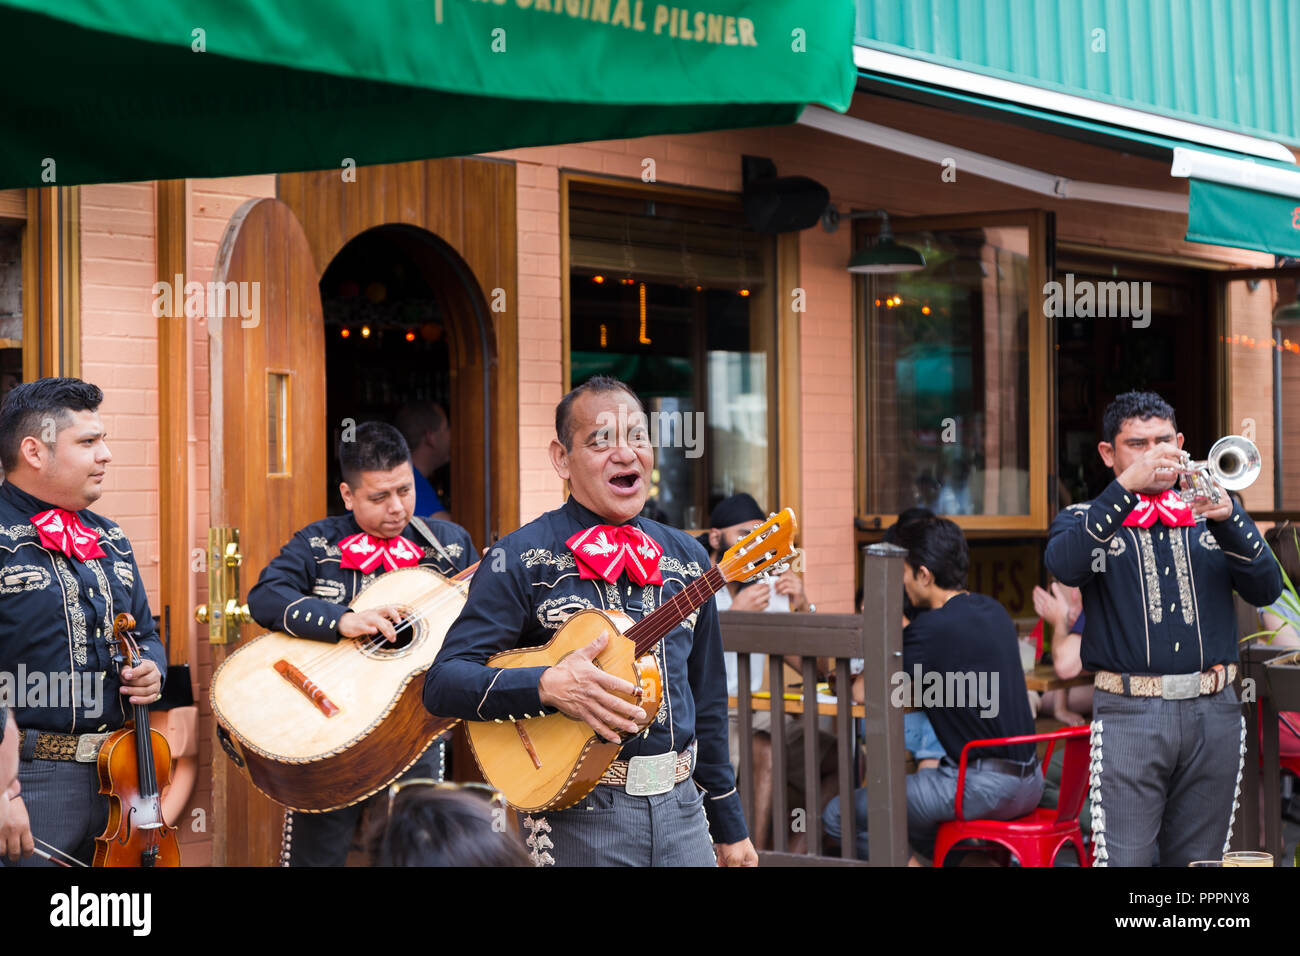 TORONTO, ON, CANADA - JULY 29, 2018: A mariachi band plays in front of a crowd in Toronto's vibrant Kensington Market. Stock Photo